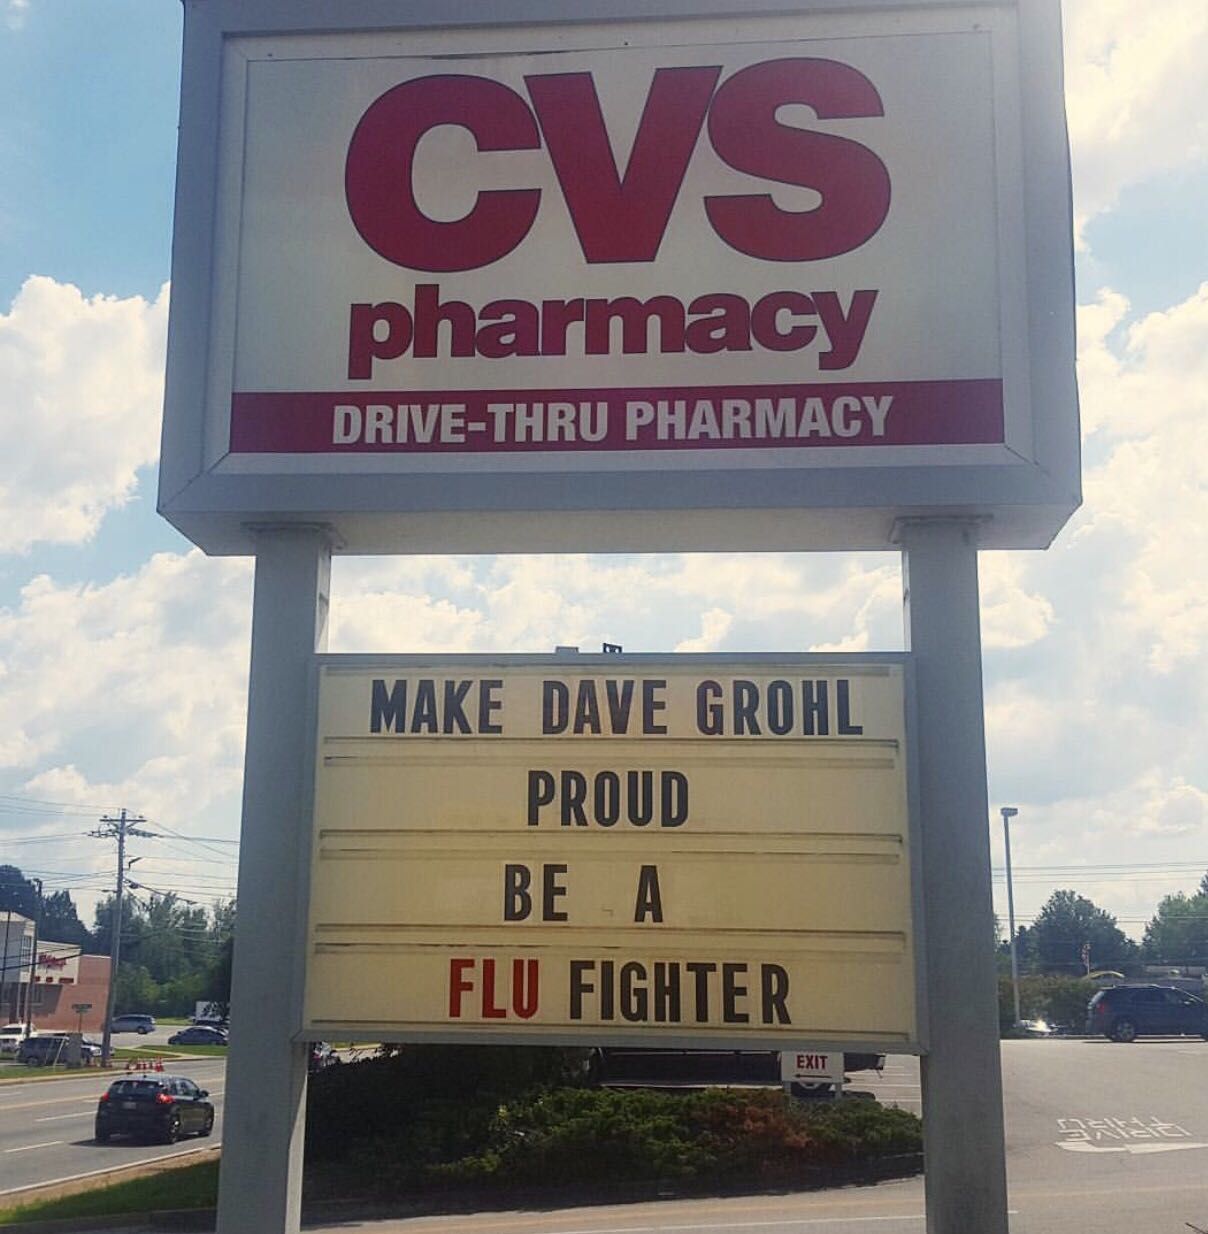 My sister got to decide the CVS sign today